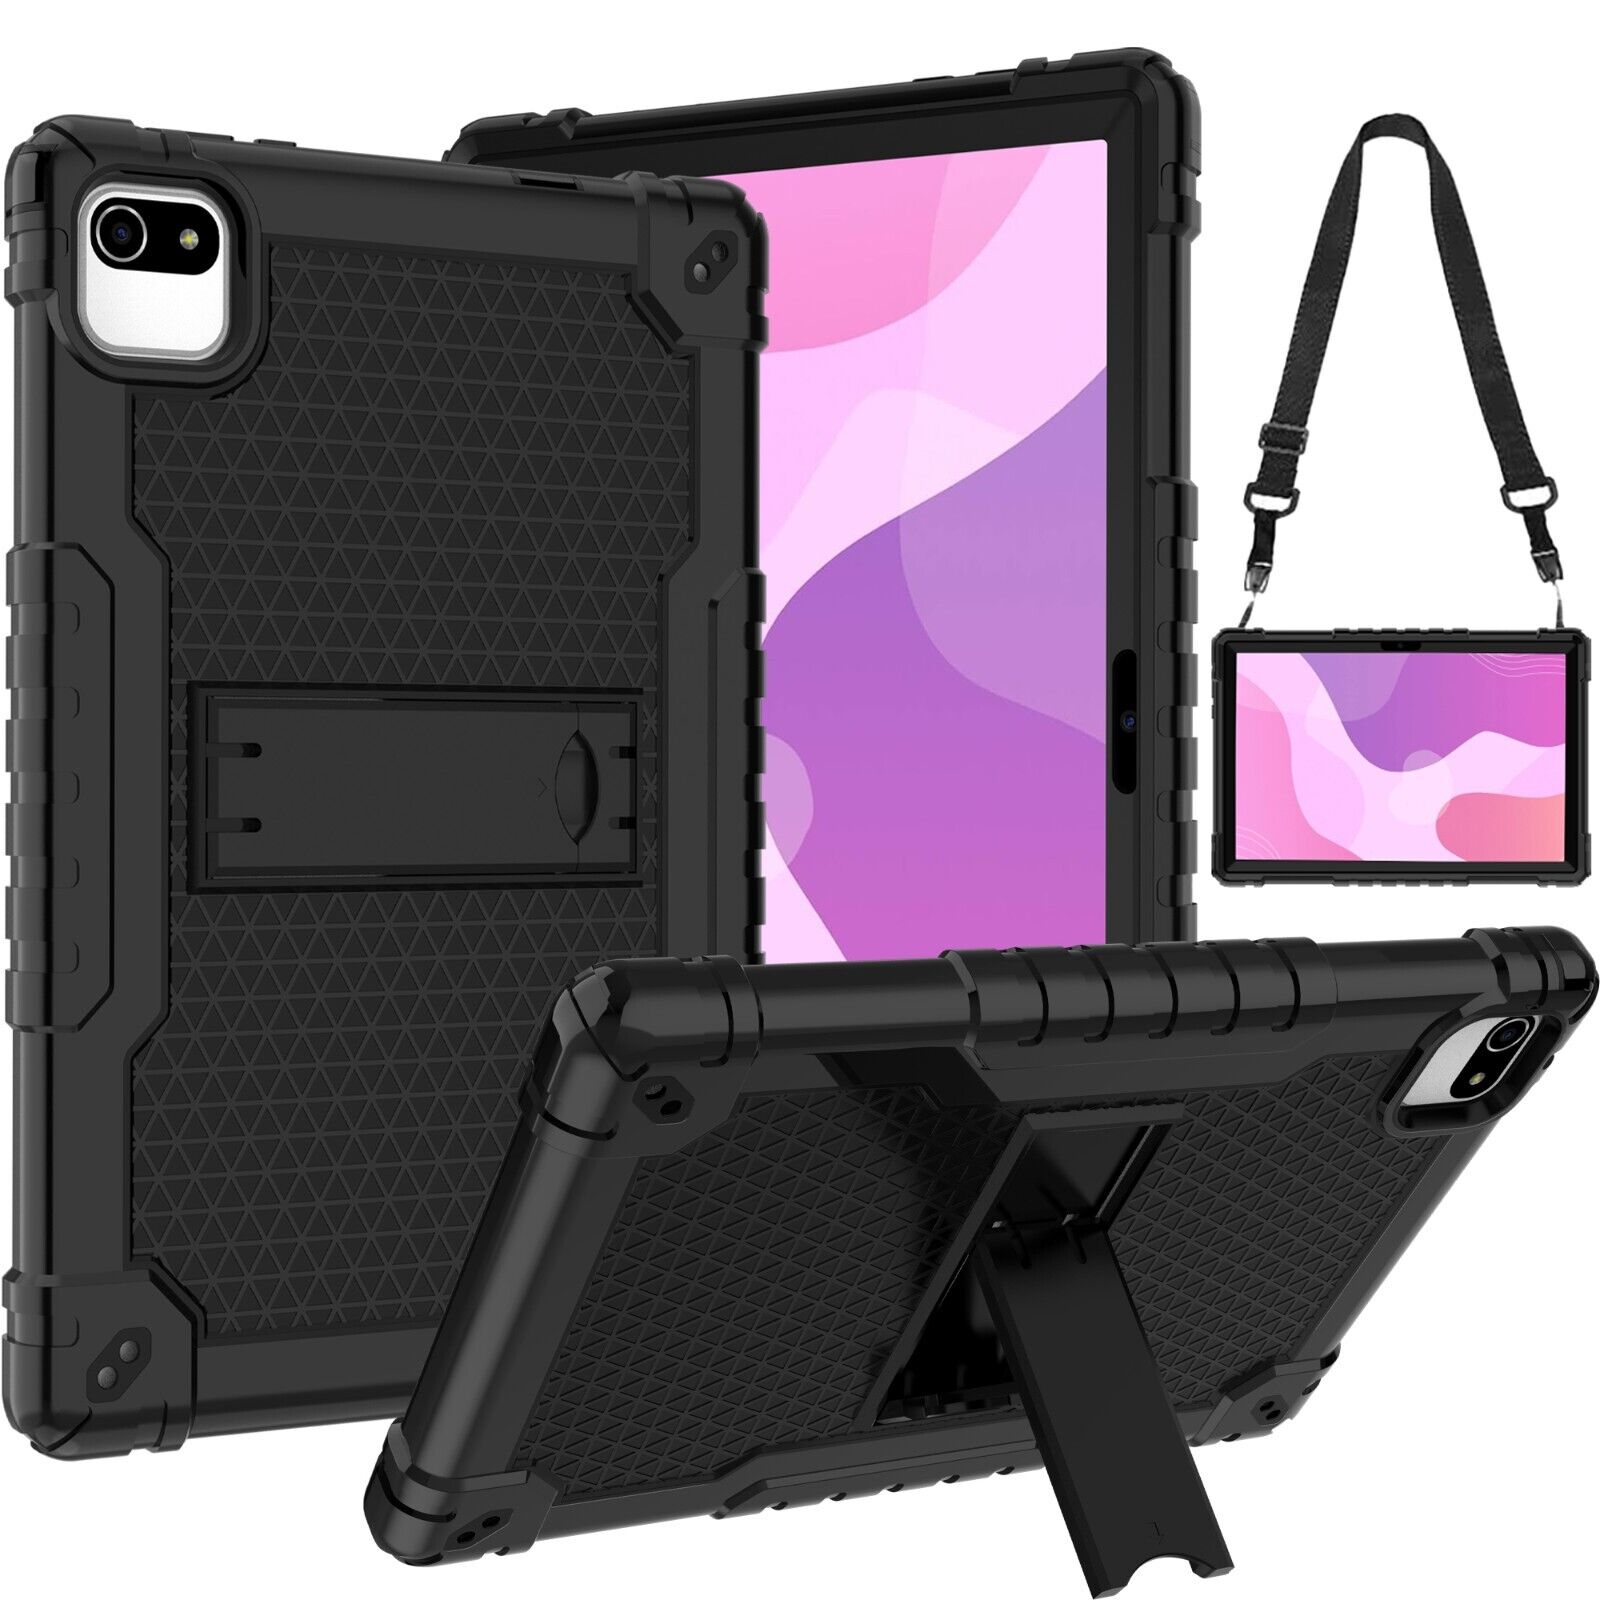 for Moderness MB1001/Velorim/ZZB 10.1 inch Hybrid Case with Shoulder Strap Stand